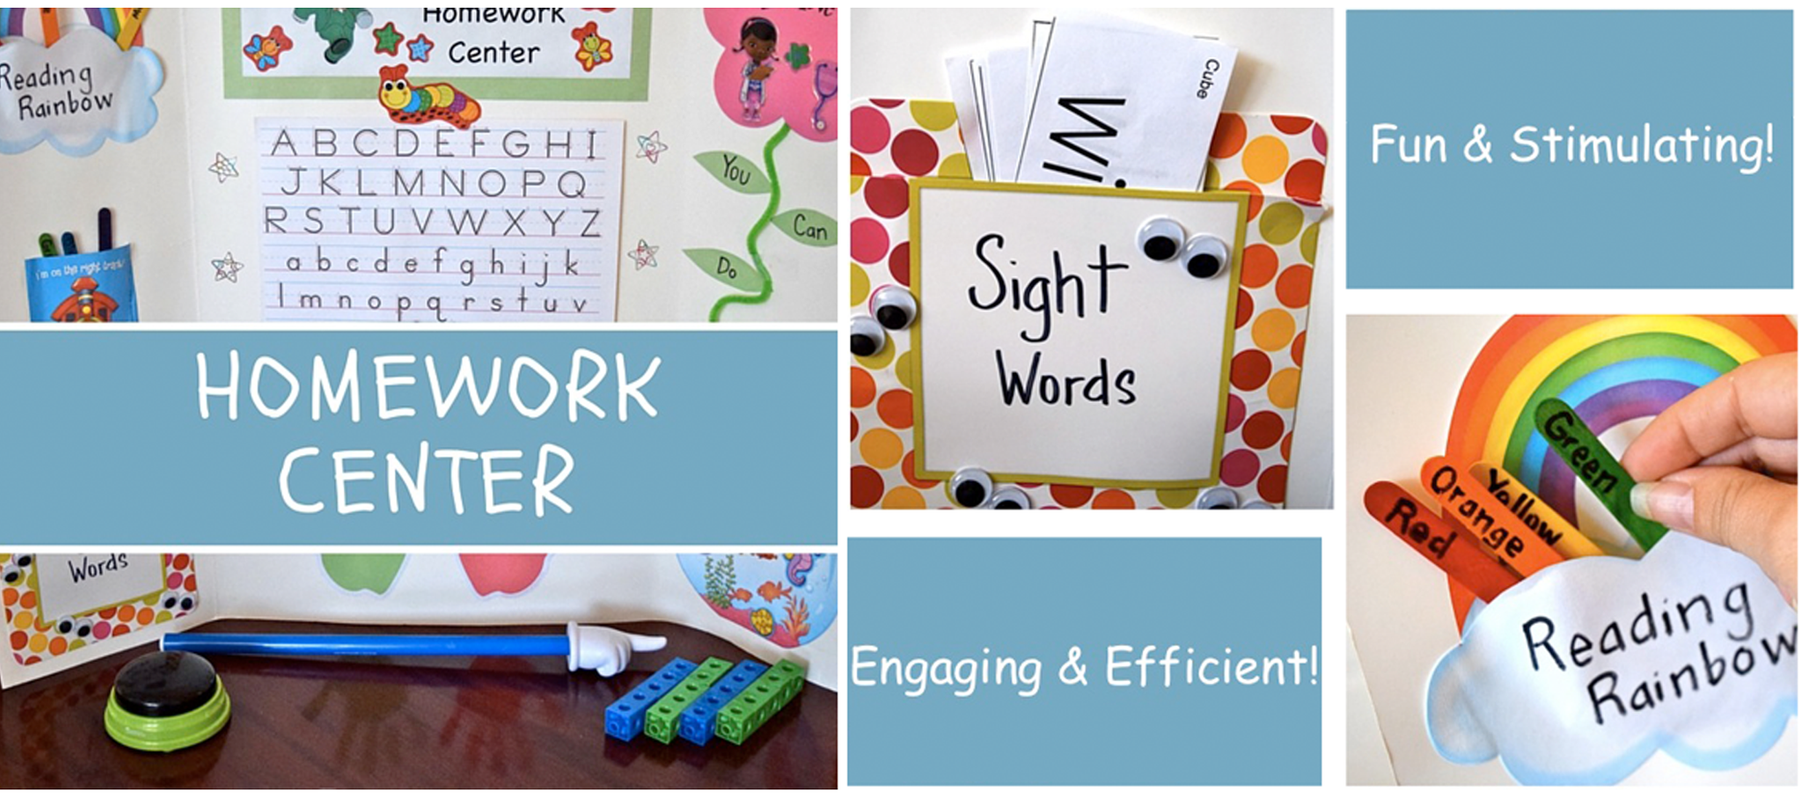 How To Create The Perfect Homework Center by Cristina Margolis